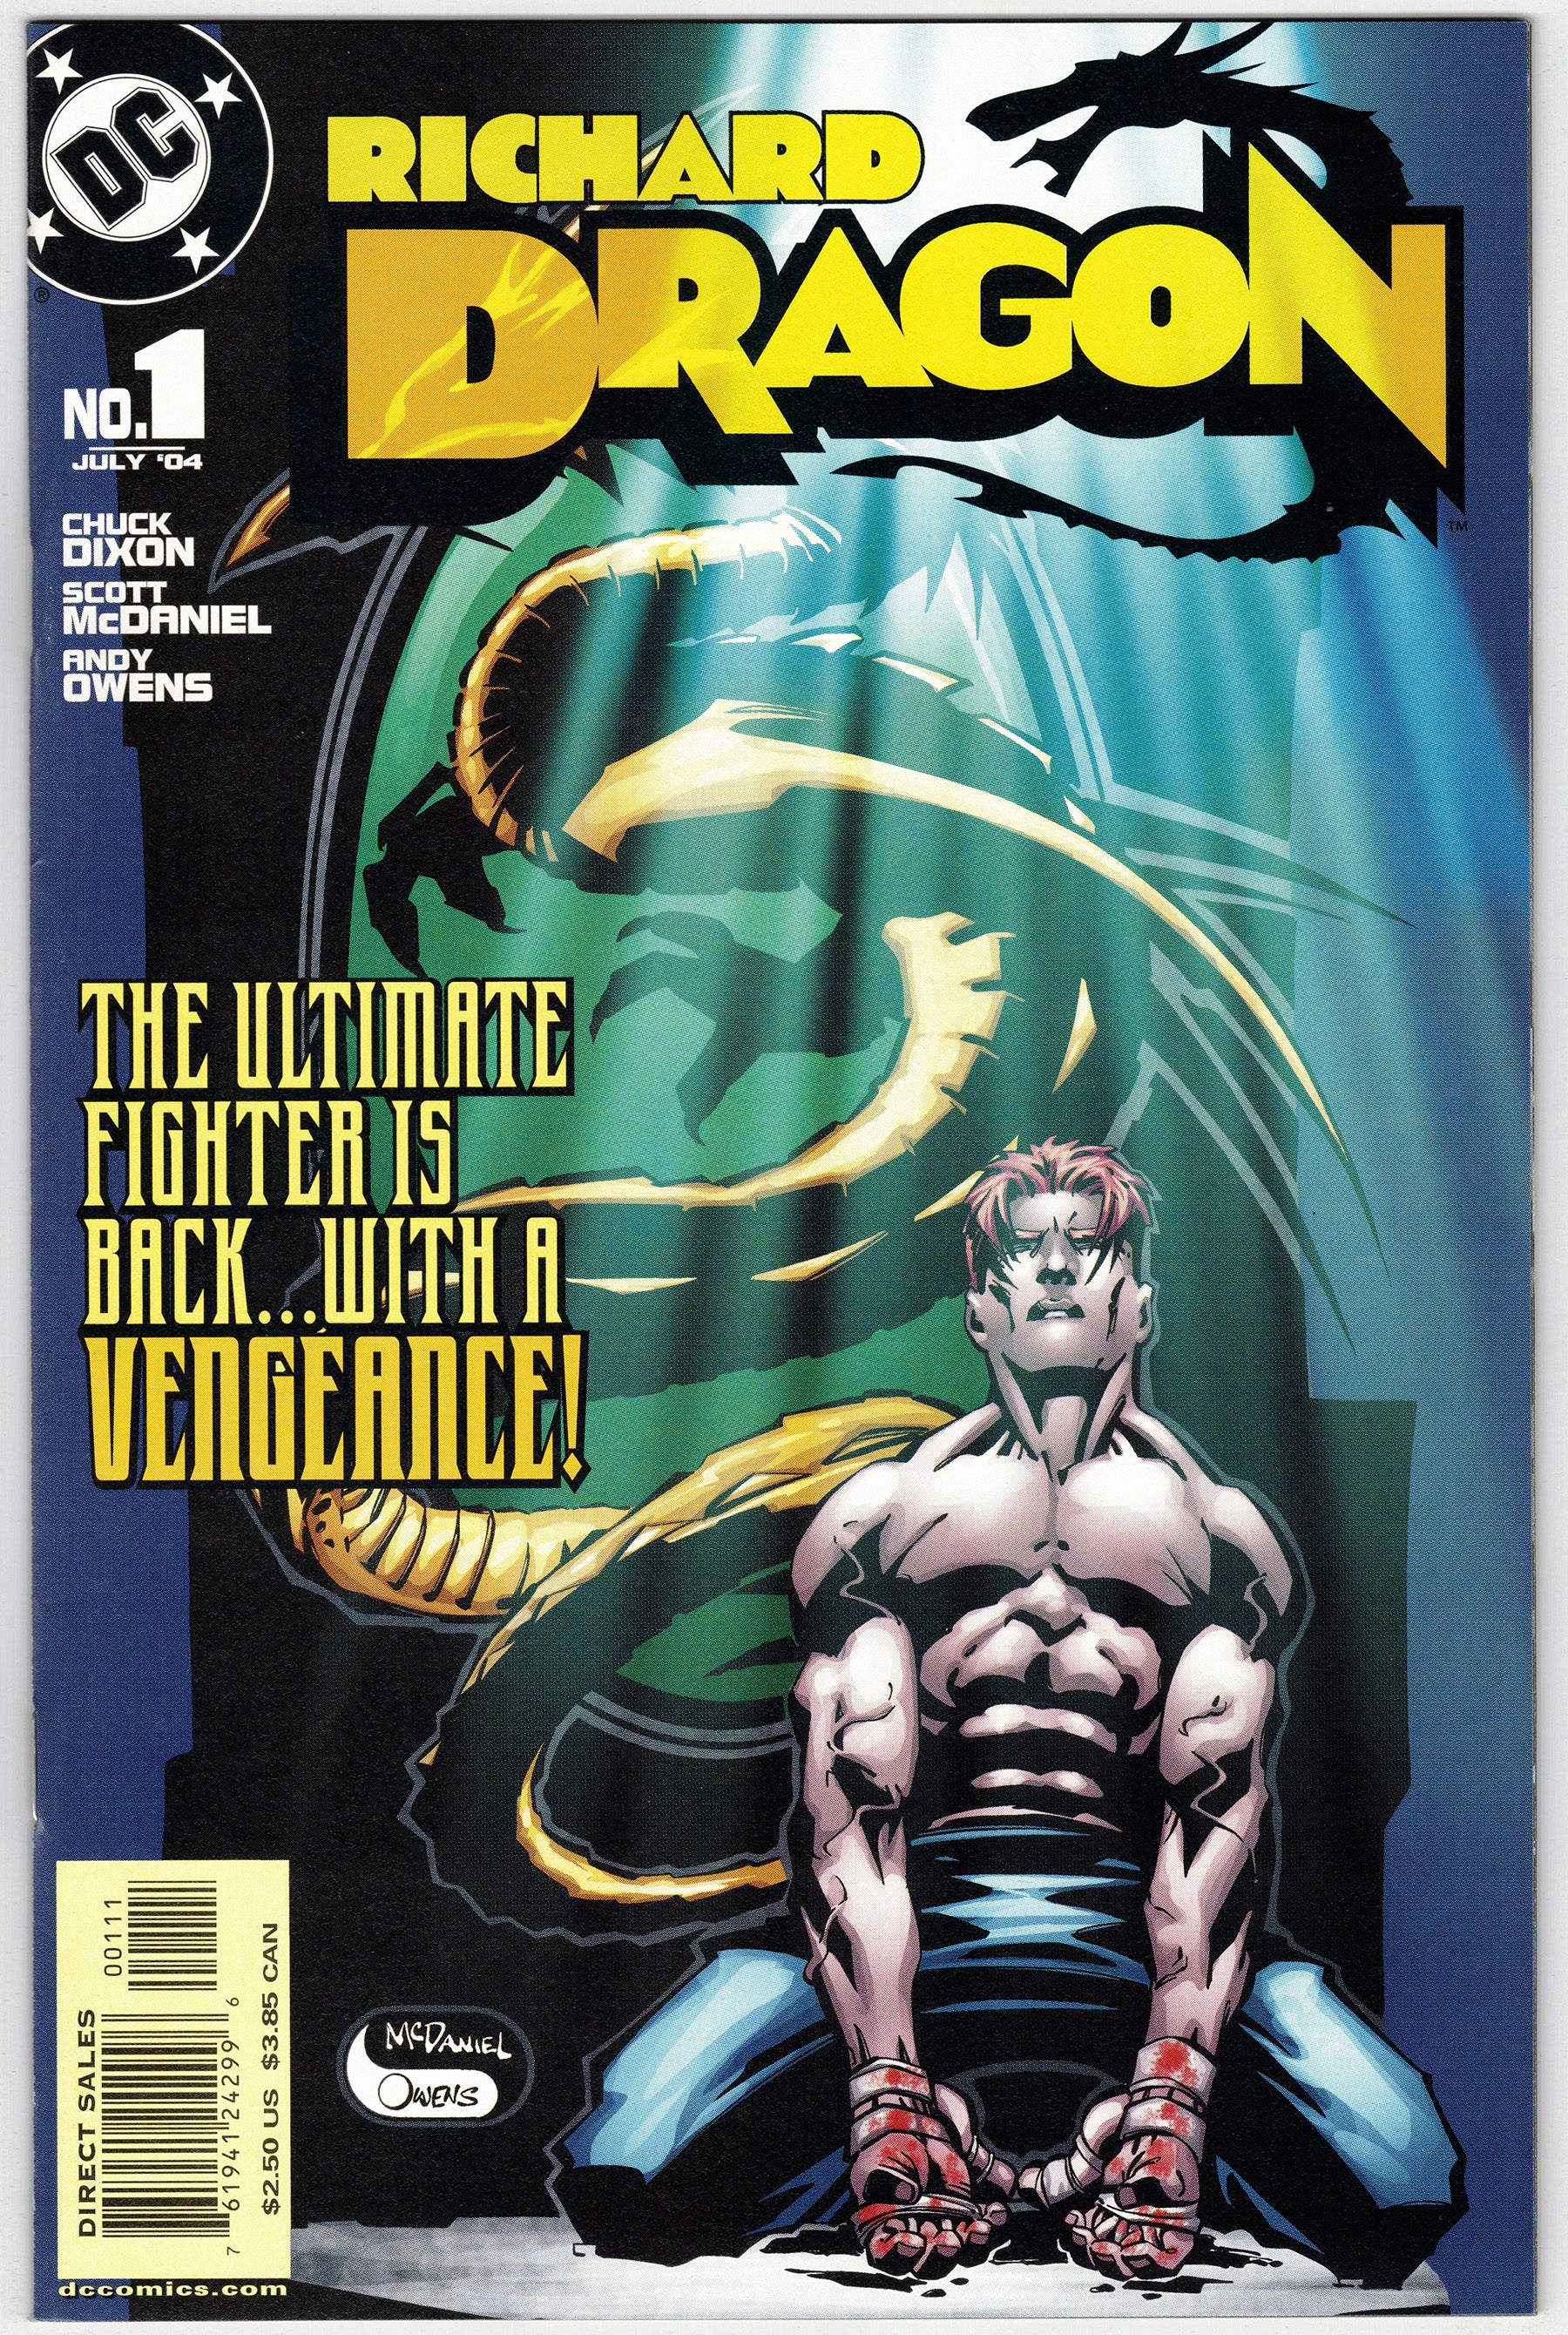 Photo of Richard Dragon (2004) Issue 1 Comic sold by Stronghold Collectibles